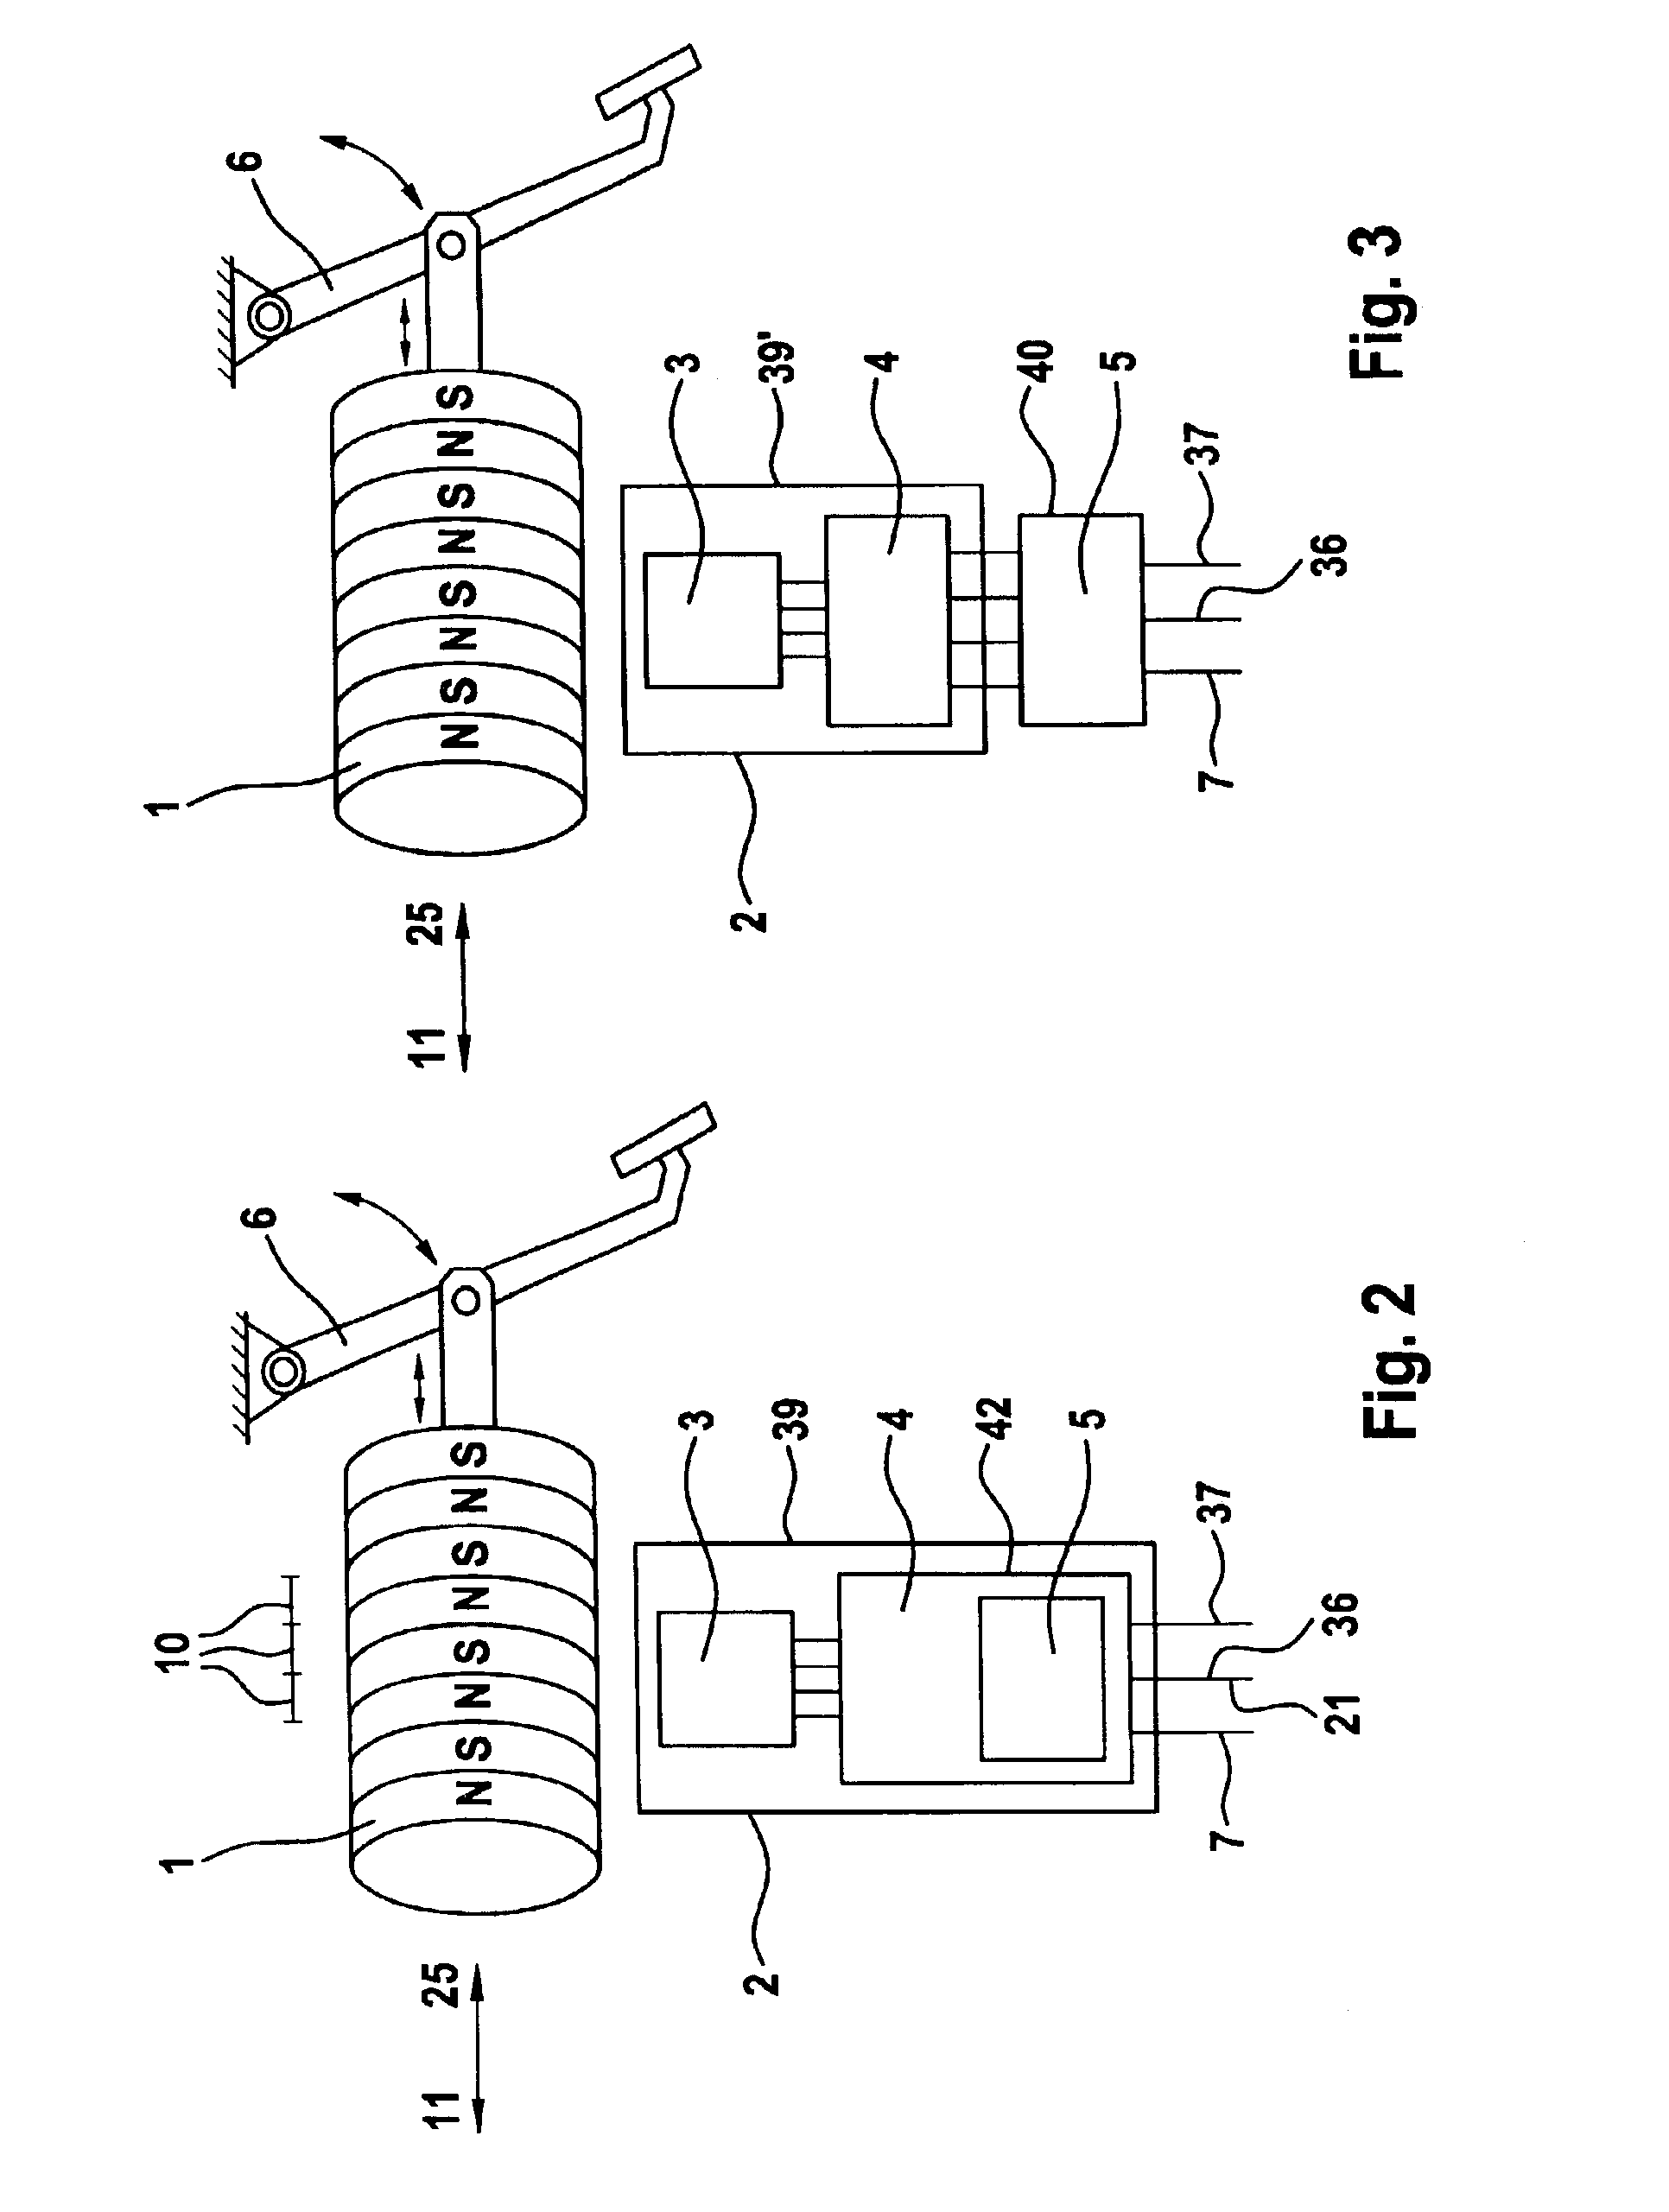 System for transmitting the position of a control element